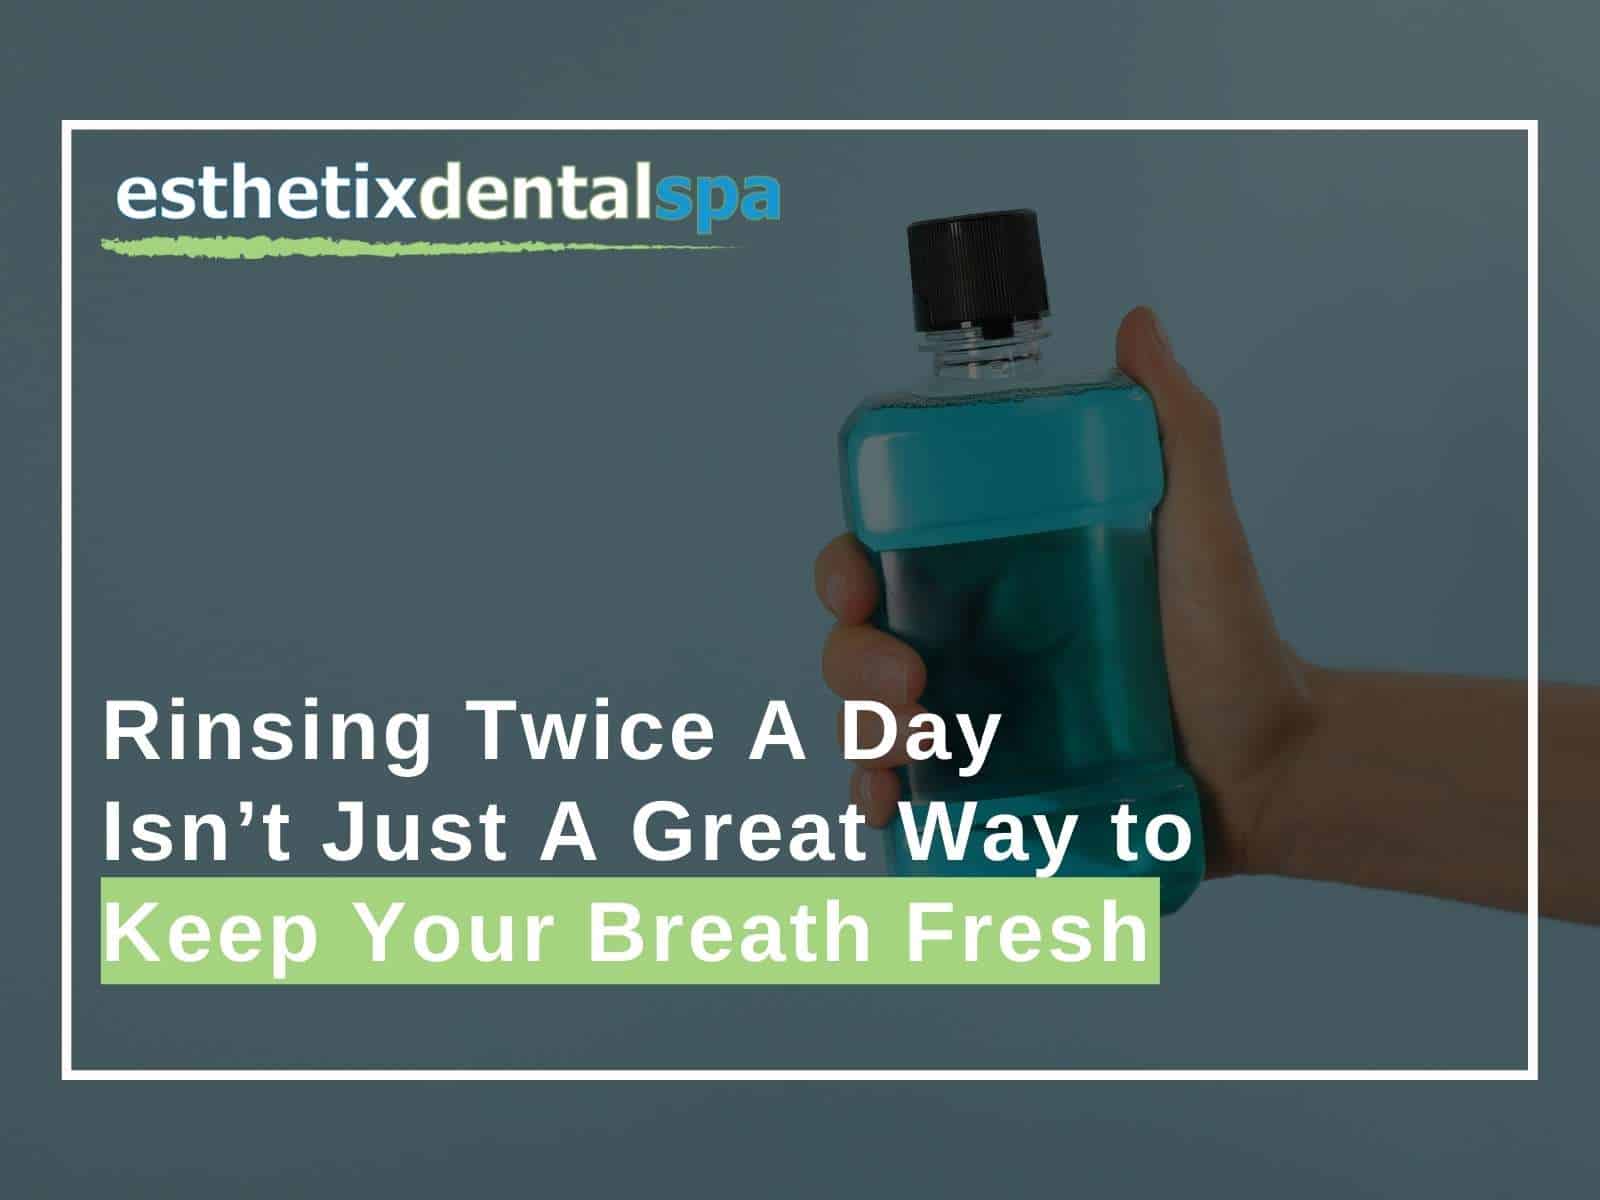 Rinsing Twice A Day Isn't Just A Great Way to Keep Your Breath Fresh